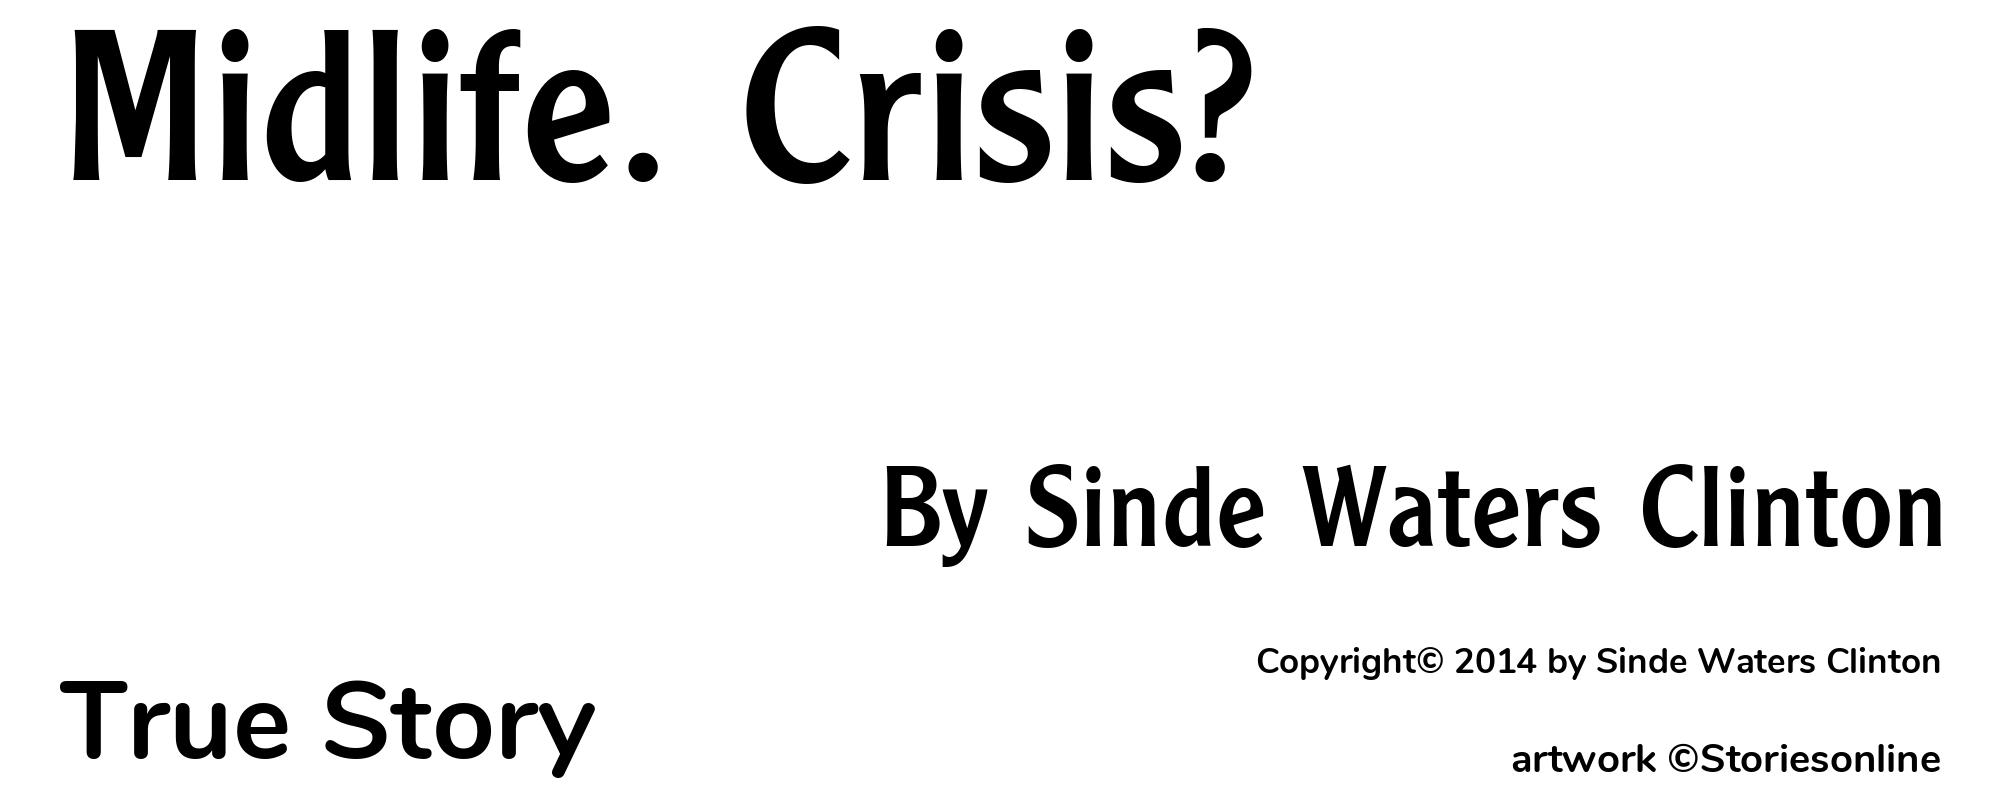 Midlife. Crisis? - Cover